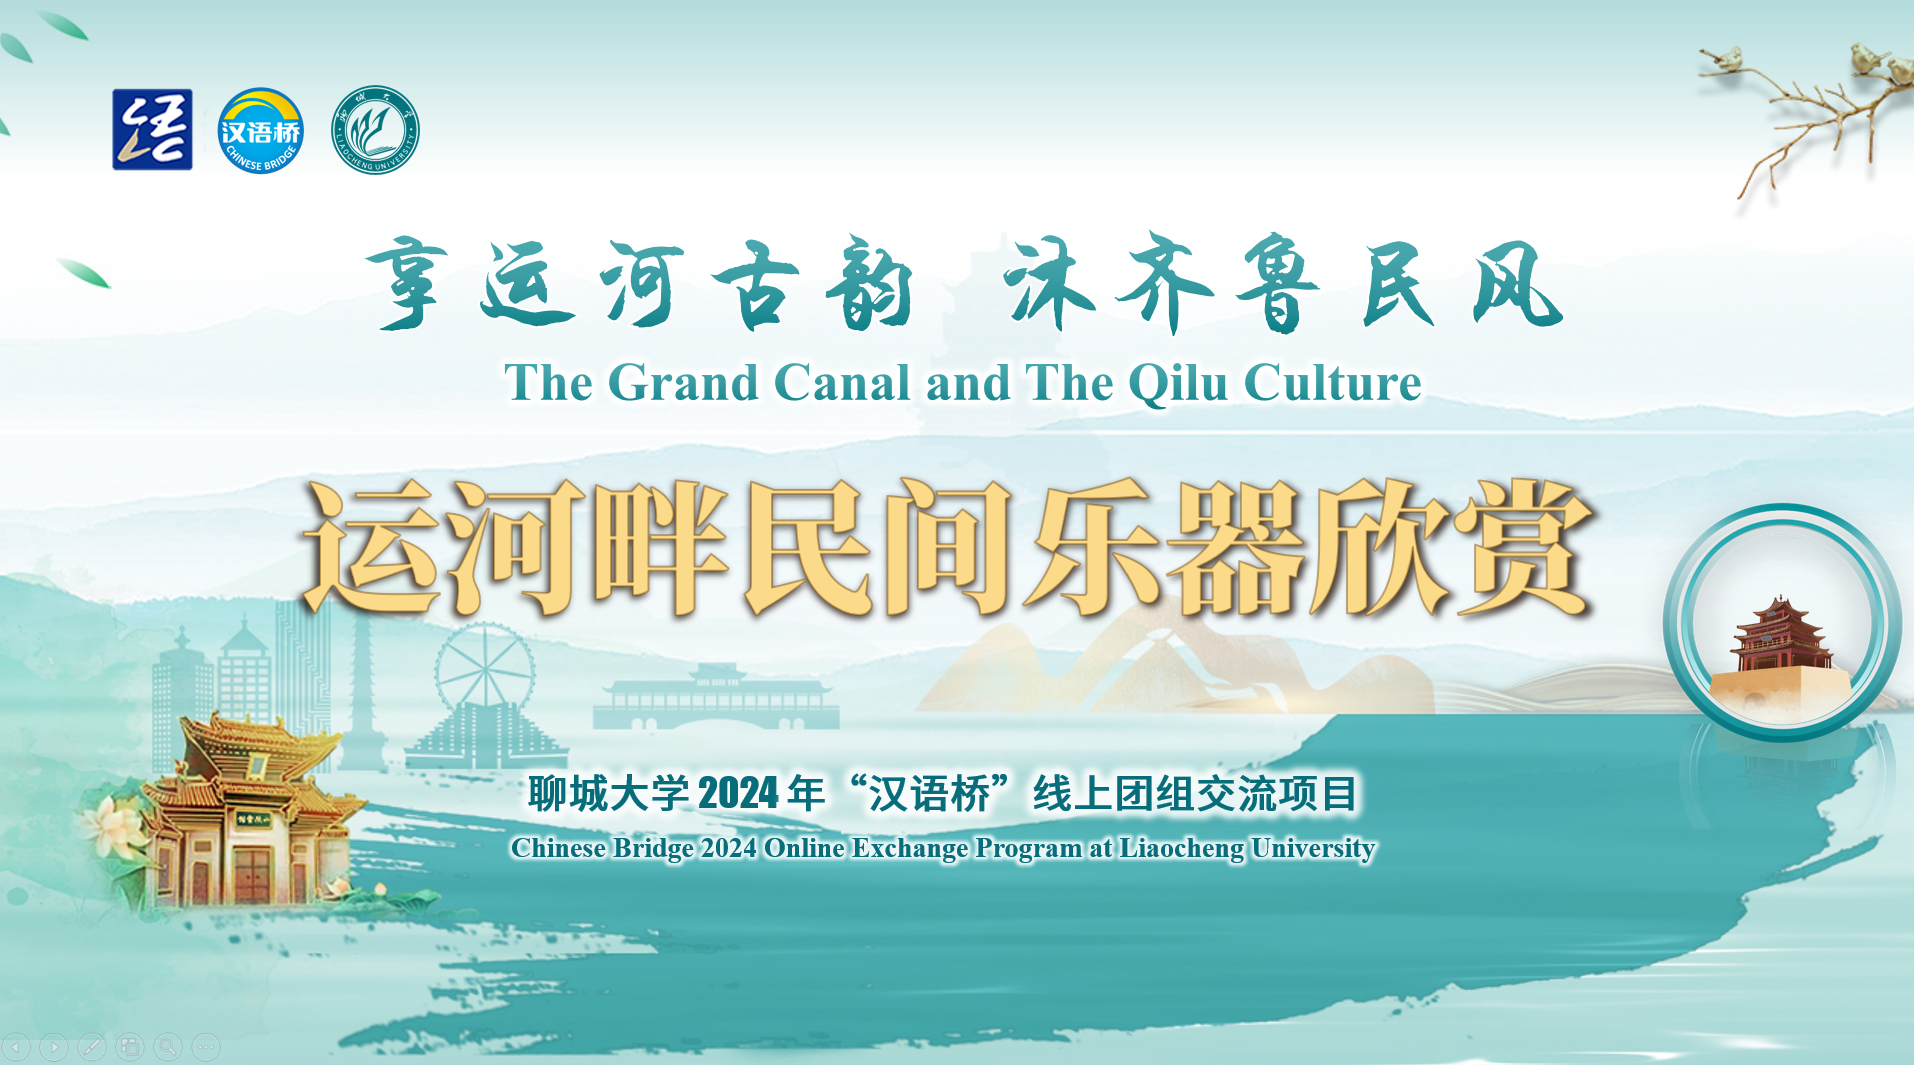 Appreciation of the Folk Instrumental Music along the Grand Canal